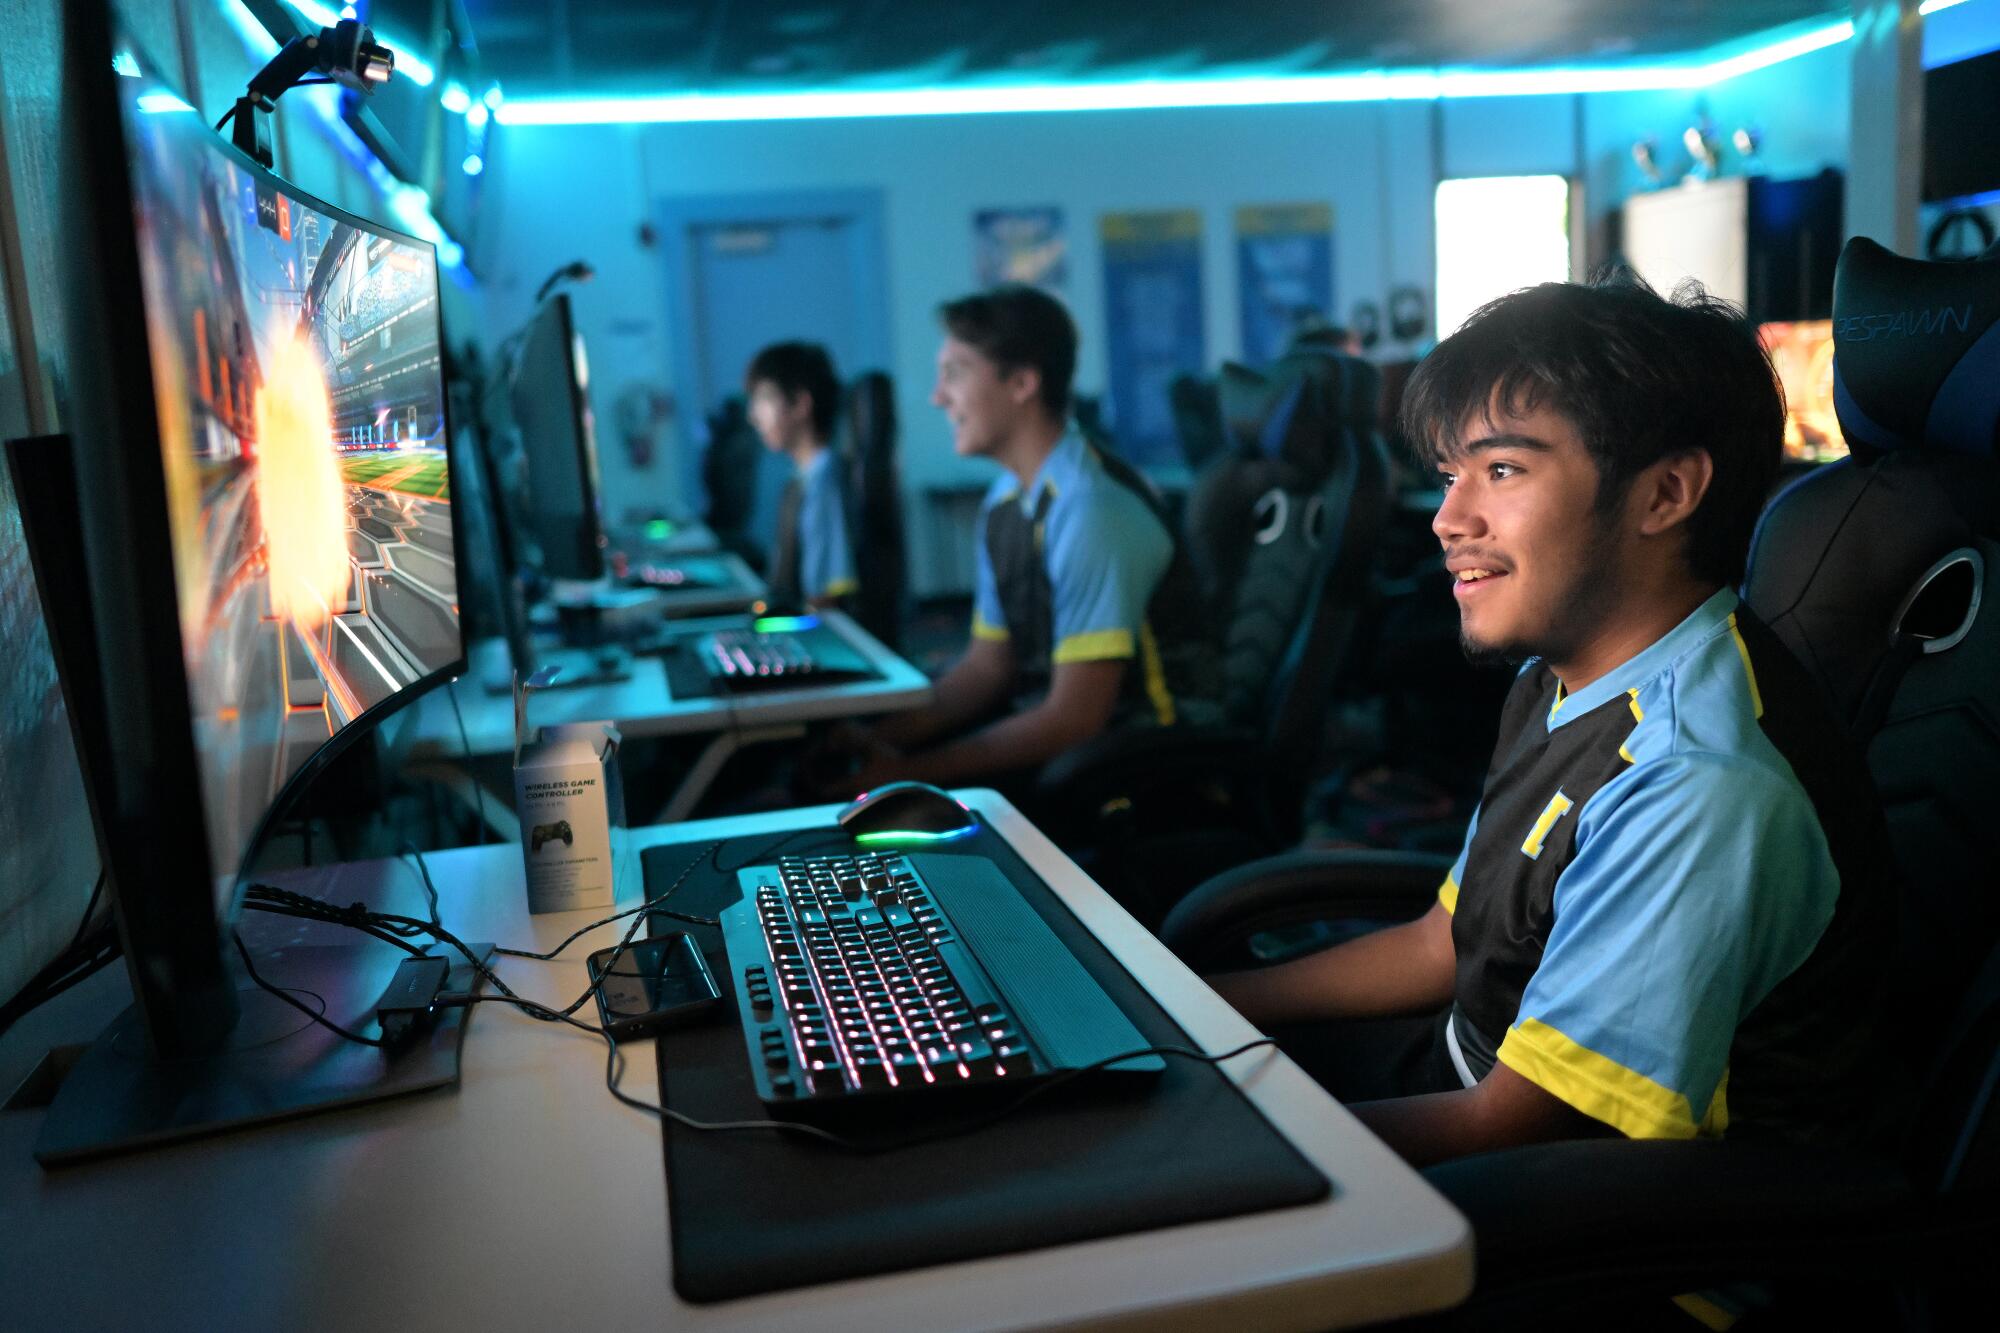 Reuben Estrada reacts while sitting at a school computer during an e-sports competition